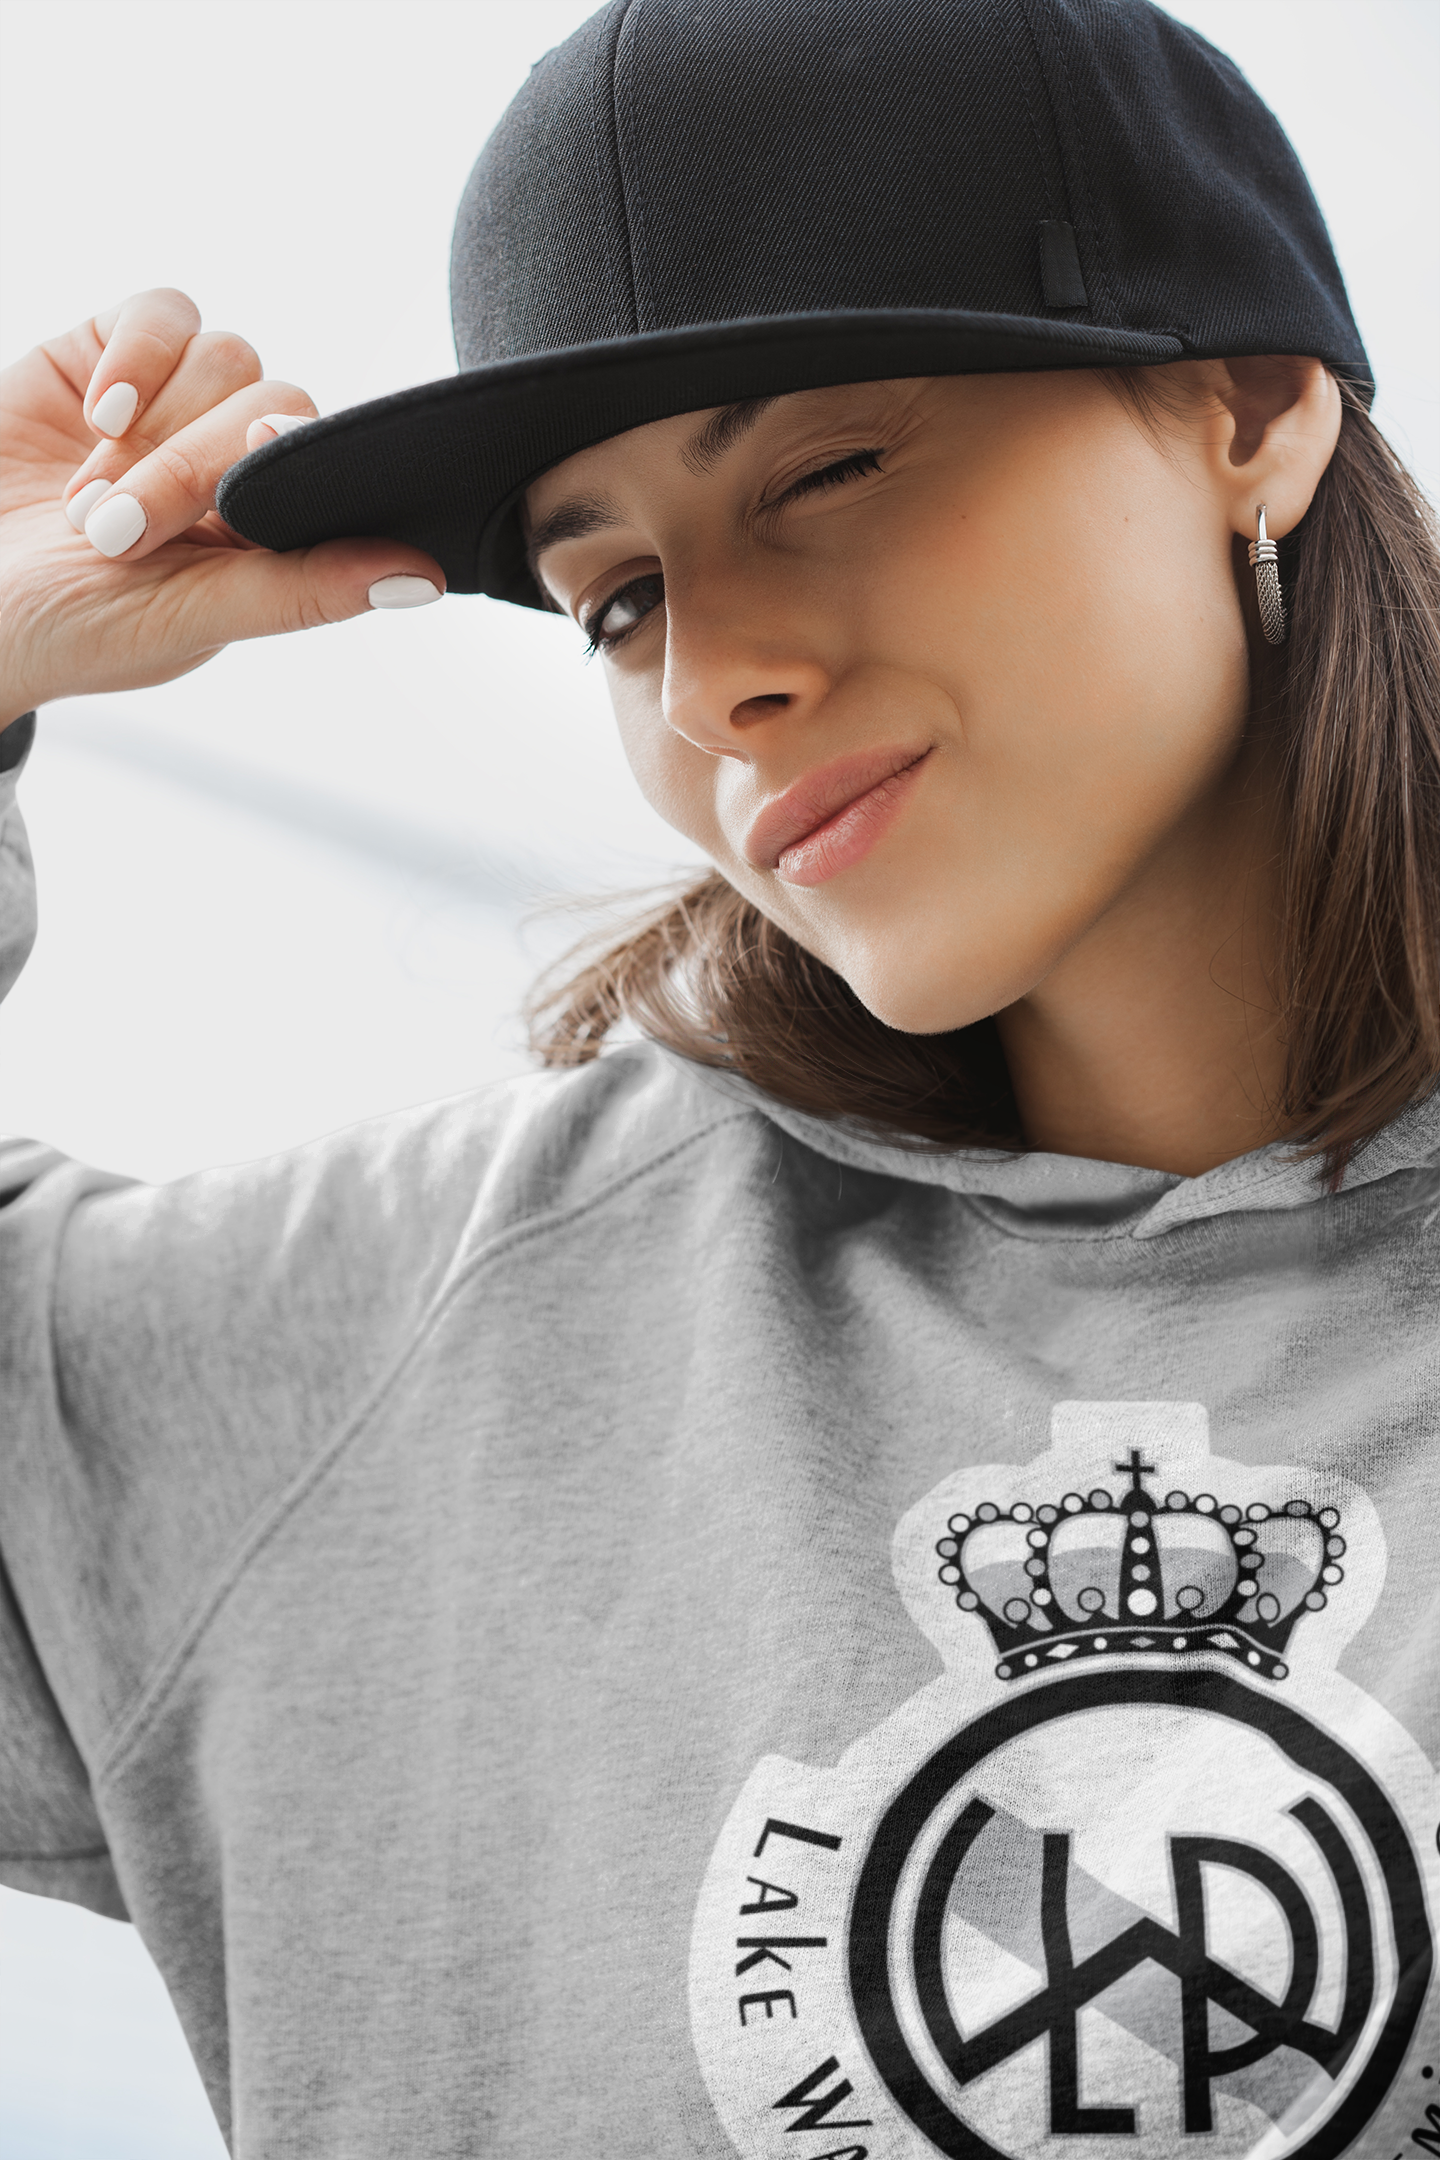 A young girl smiling and wearing and black baseball hat and a gray Lake Washington Premier FC Hoodie with the club crest on the front in black and white colors.